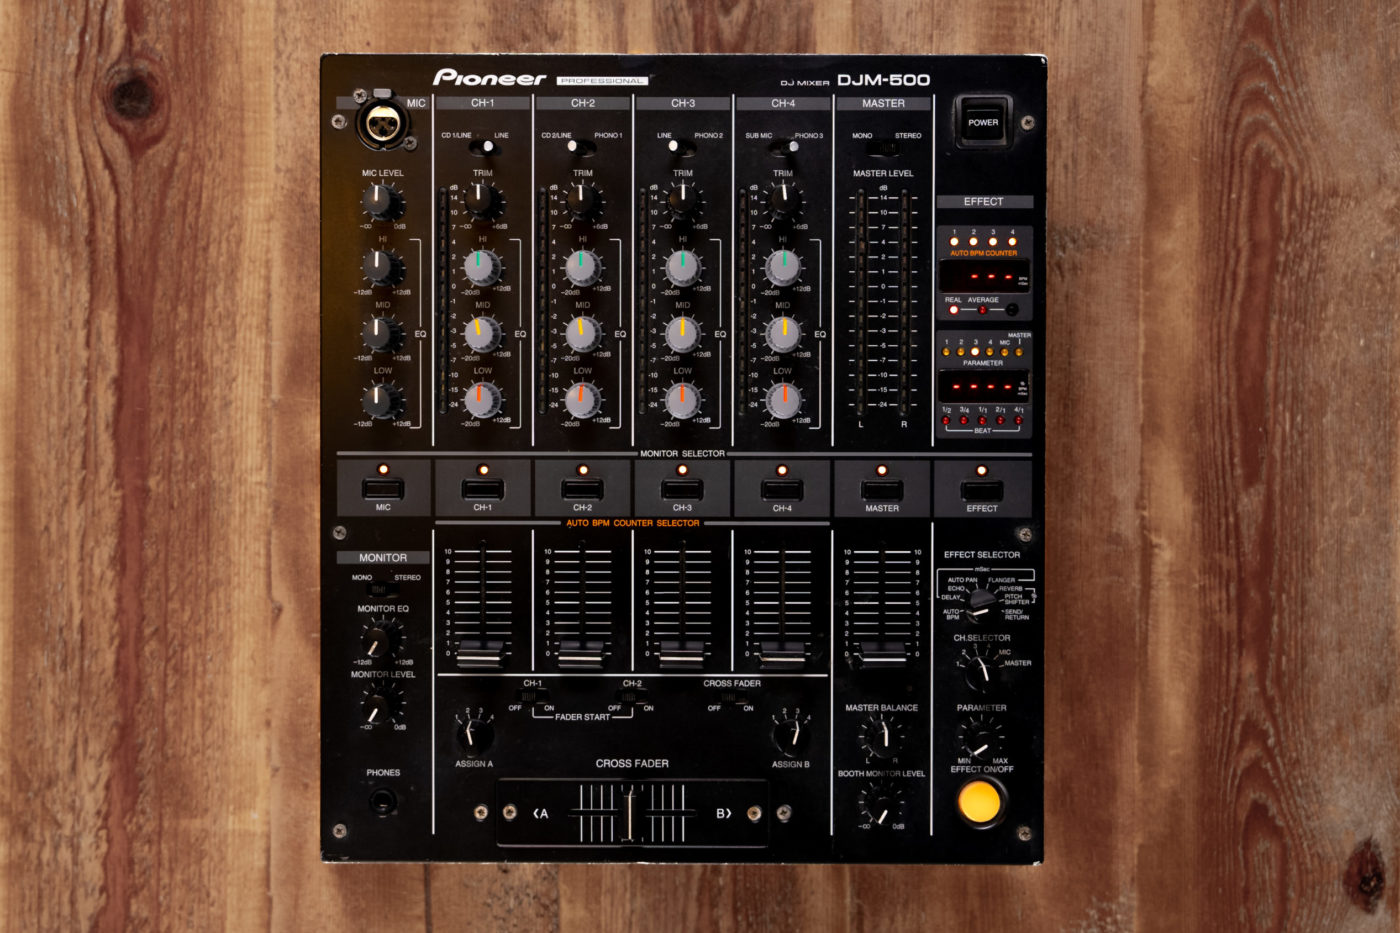 Meet the DJM-500, the first ever mixer from Pioneer DJ